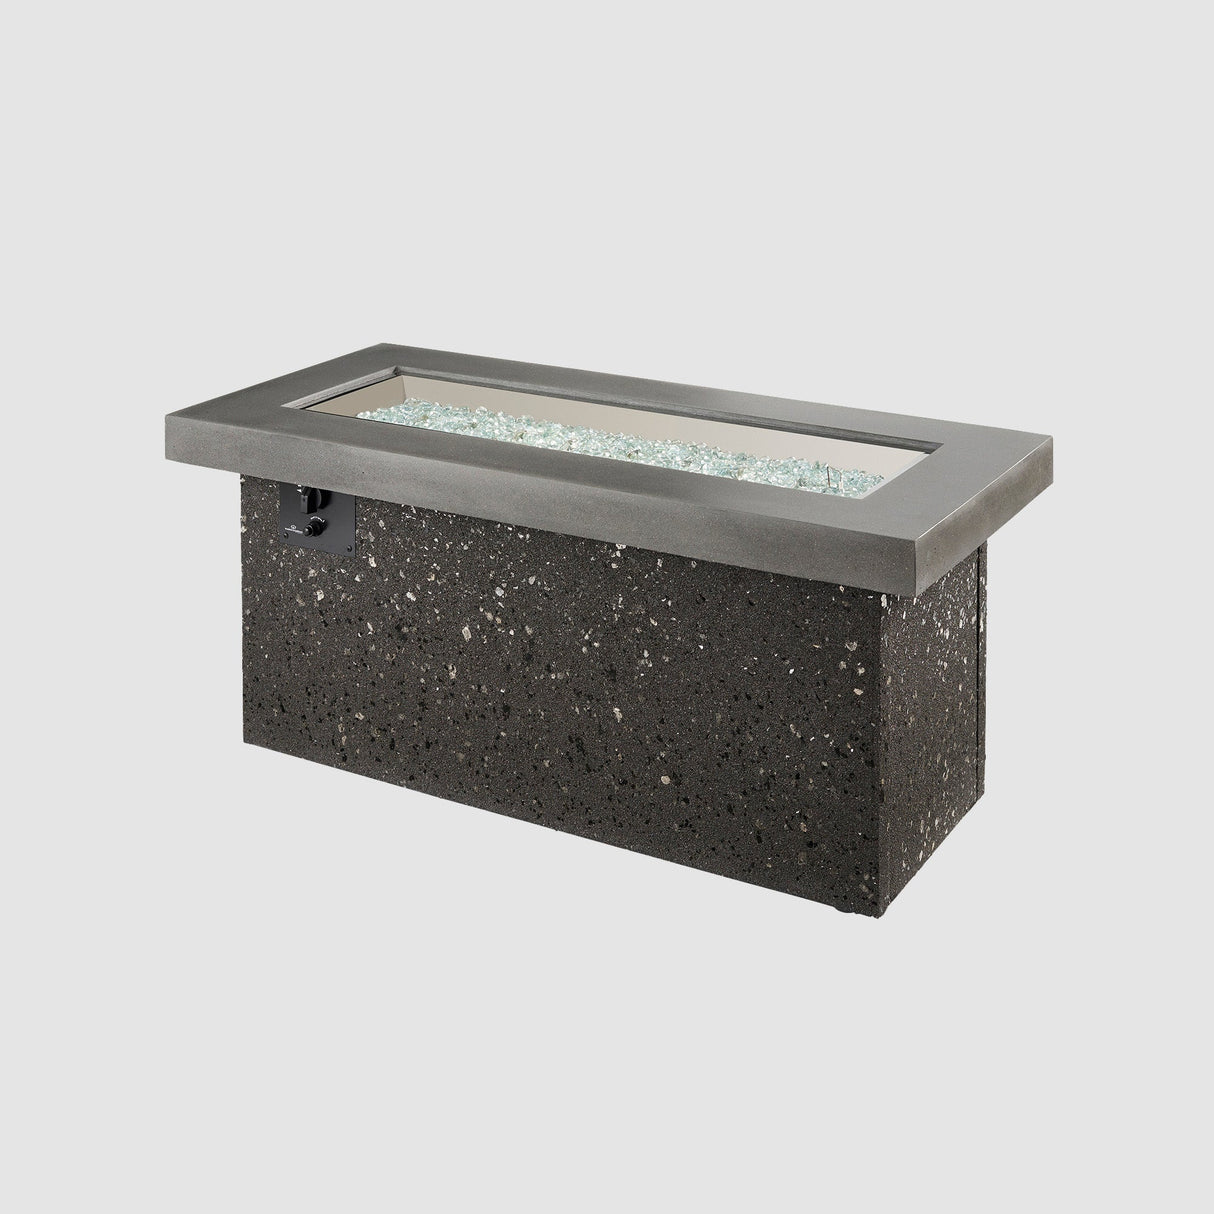 Midnight Mist Key Largo Linear Gas Fire Pit Table with fire media on the burner on a grey background